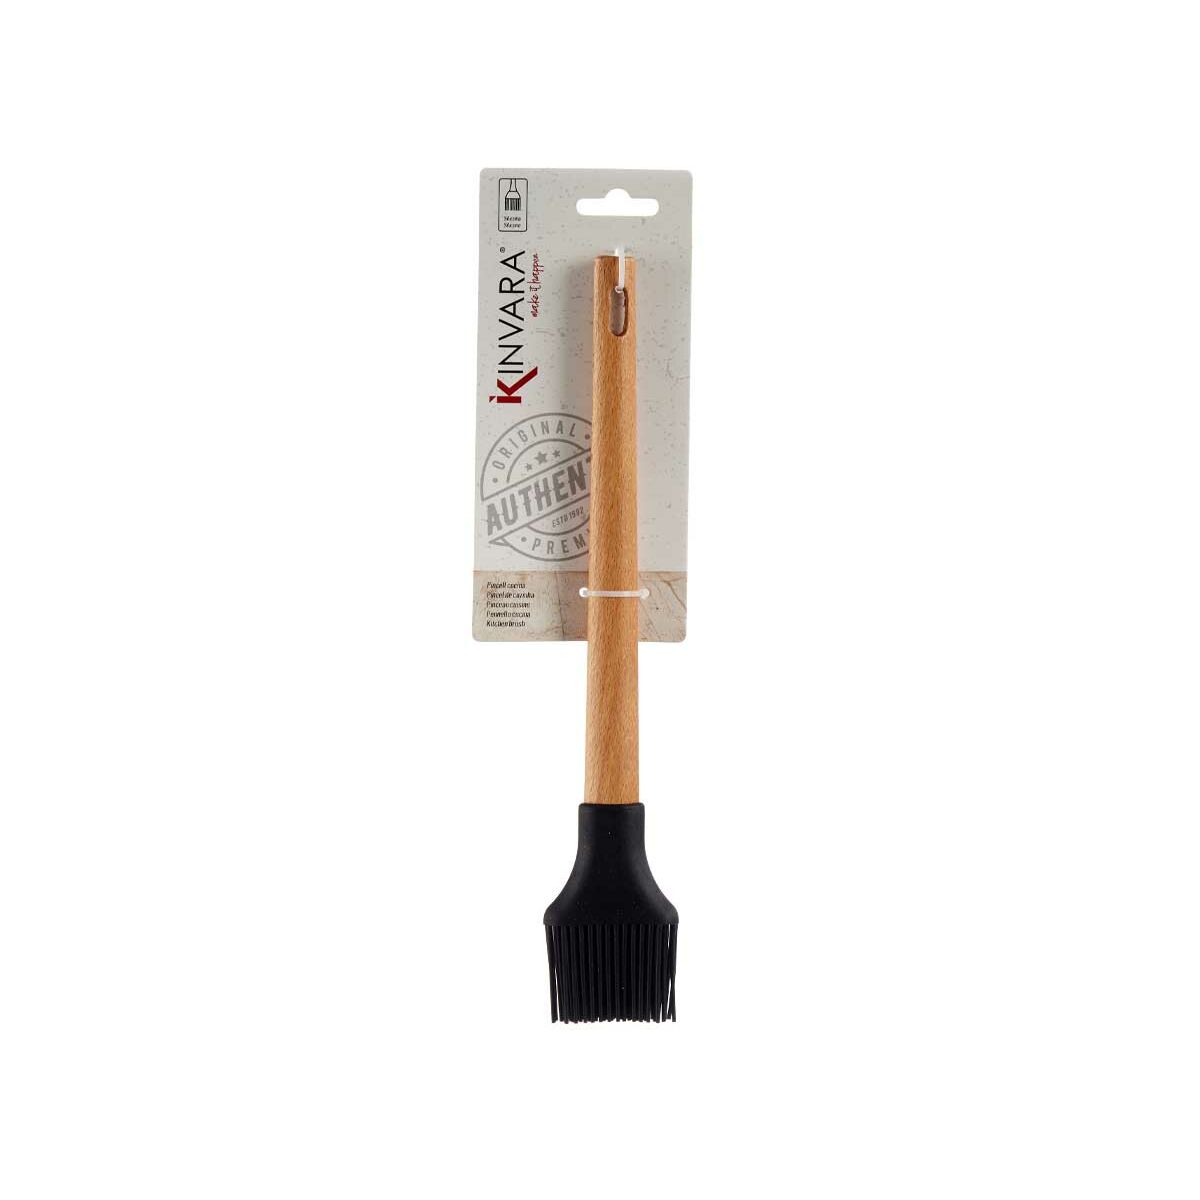 Silicone Pastry Brush Black beech wood 5 x 1,8 x 28 cm (48 Units)